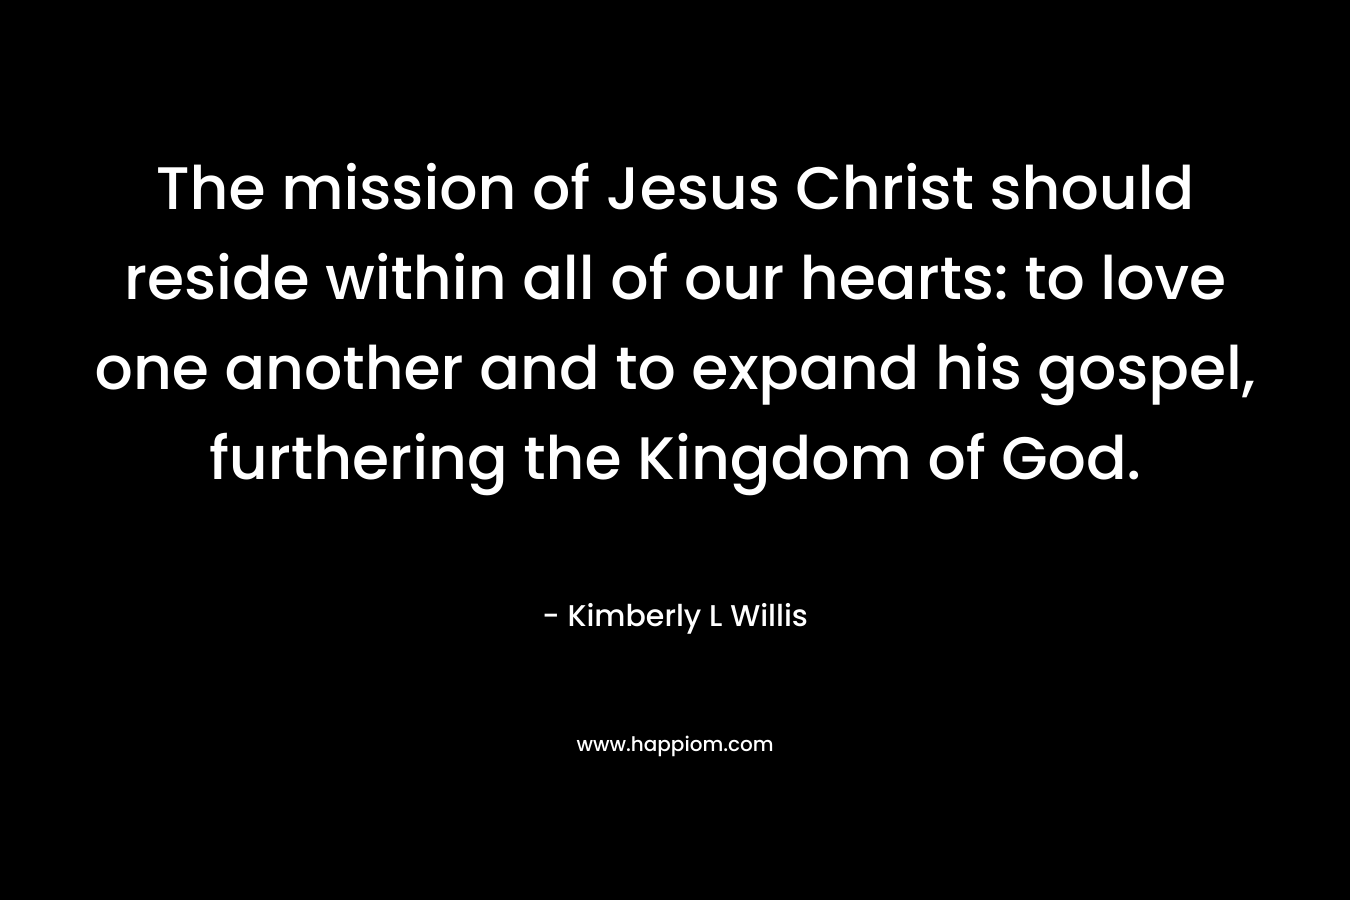 The mission of Jesus Christ should reside within all of our hearts: to love one another and to expand his gospel, furthering the Kingdom of God.